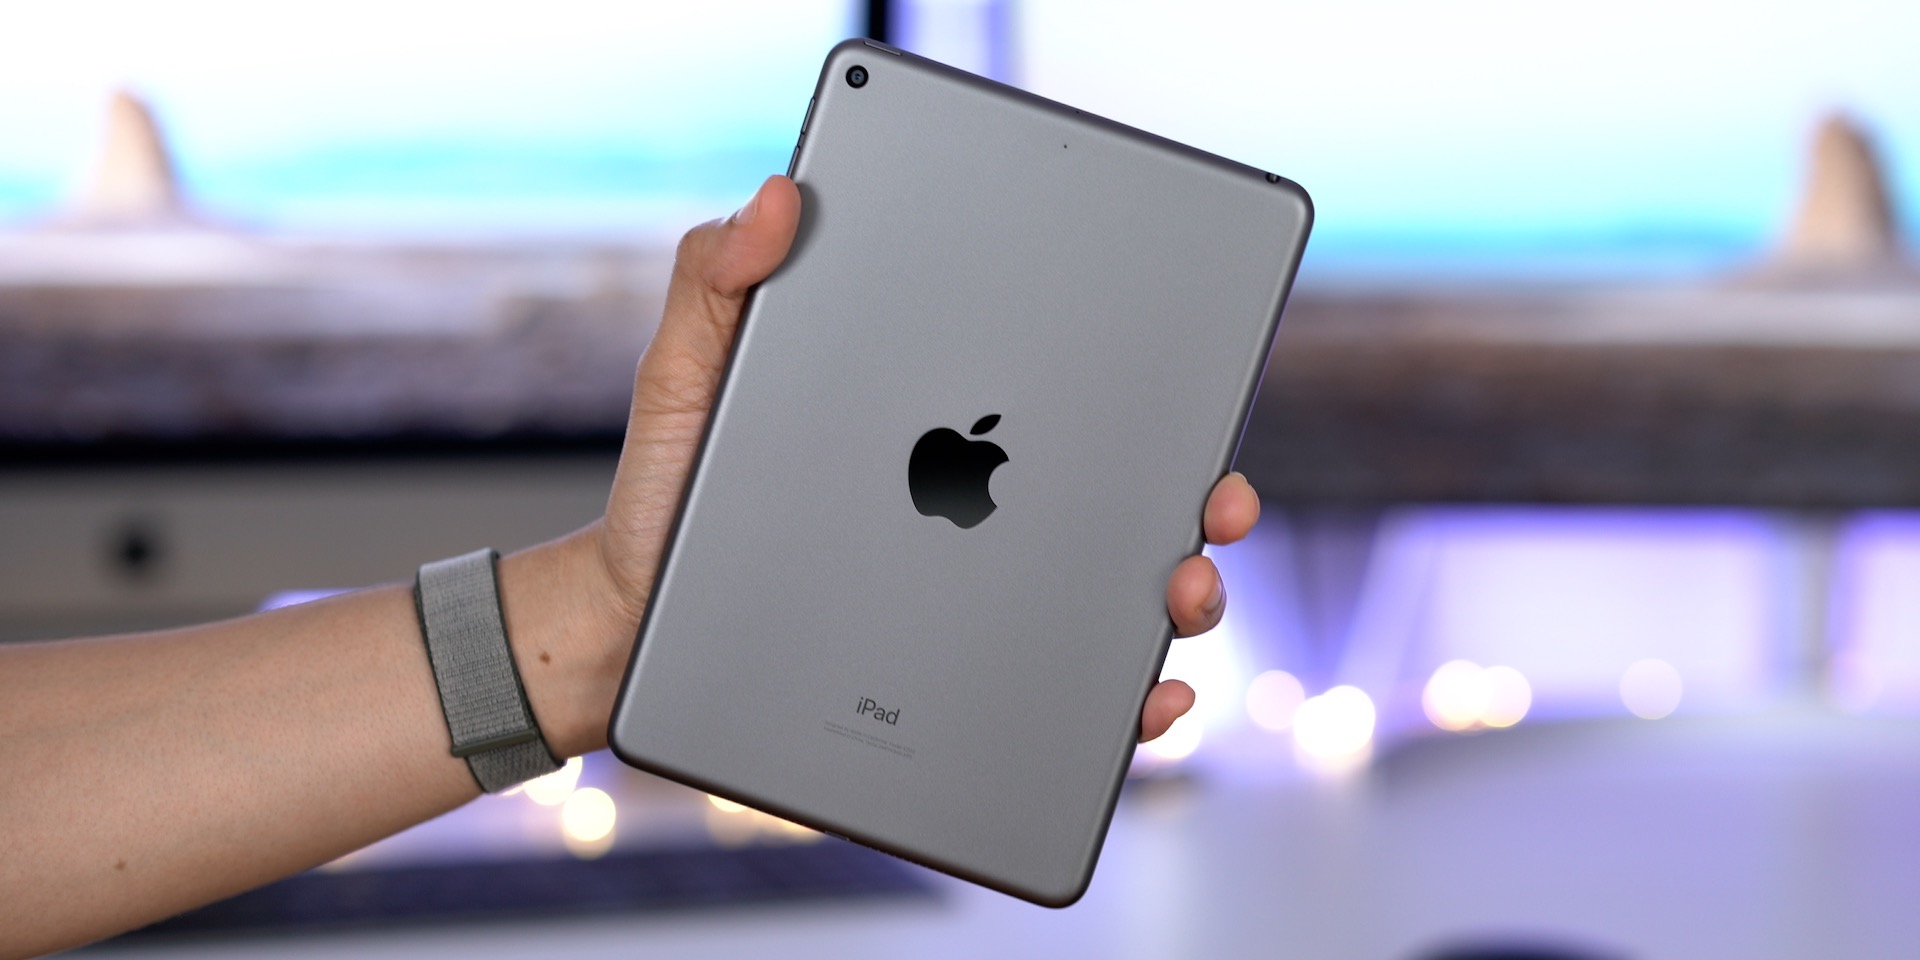 Apple's 256GB iPad mini 5 drops to best price in 5-months at $59 off